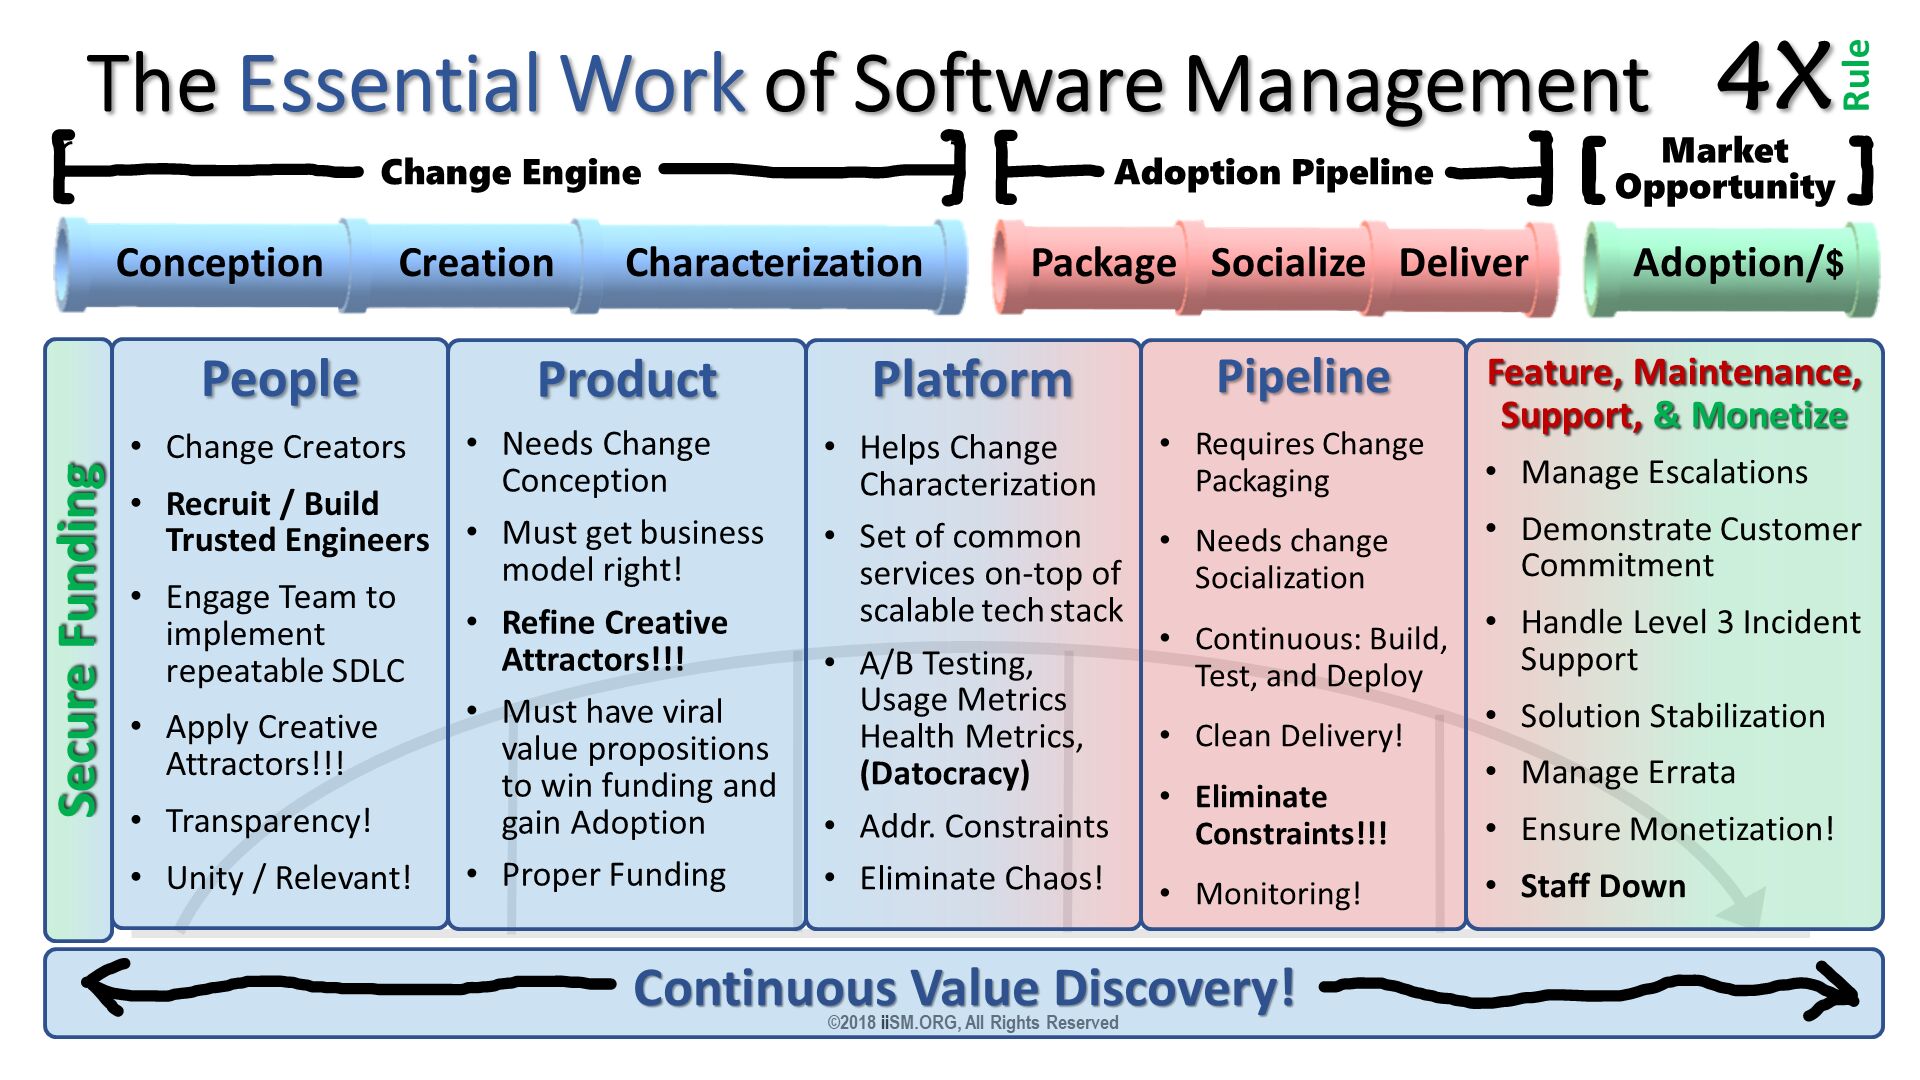 The Essential Work of Software Management. ©2018 iiSM.ORG, All Rights Reserved. People
Change Creators
Recruit / Build Trusted Engineers
Engage Team to implement repeatable SDLC 
Apply Creative Attractors!!!
Transparency!
Unity / Relevant!

. Product
Needs Change Conception
Must get business model right!
Refine Creative Attractors!!!
Must have viral value propositions to win funding and gain Adoption
Proper Funding
. Platform
Helps Change Characterization
Set of common services on-top of scalable tech stack 
A/B Testing, Usage Metrics Health Metrics,(Datocracy)
Addr. Constraints
Eliminate Chaos!

. Pipeline
Requires Change Packaging 
Needs change Socialization
Continuous: Build, Test, and Deploy
Clean Delivery!
Eliminate Constraints!!!
Monitoring!
. Feature, Maintenance, Support, & Monetize
Manage Escalations
Demonstrate Customer Commitment
Handle Level 3 Incident Support
Solution Stabilization
Manage Errata
Ensure Monetization!
Staff Down
. Secure Funding. 